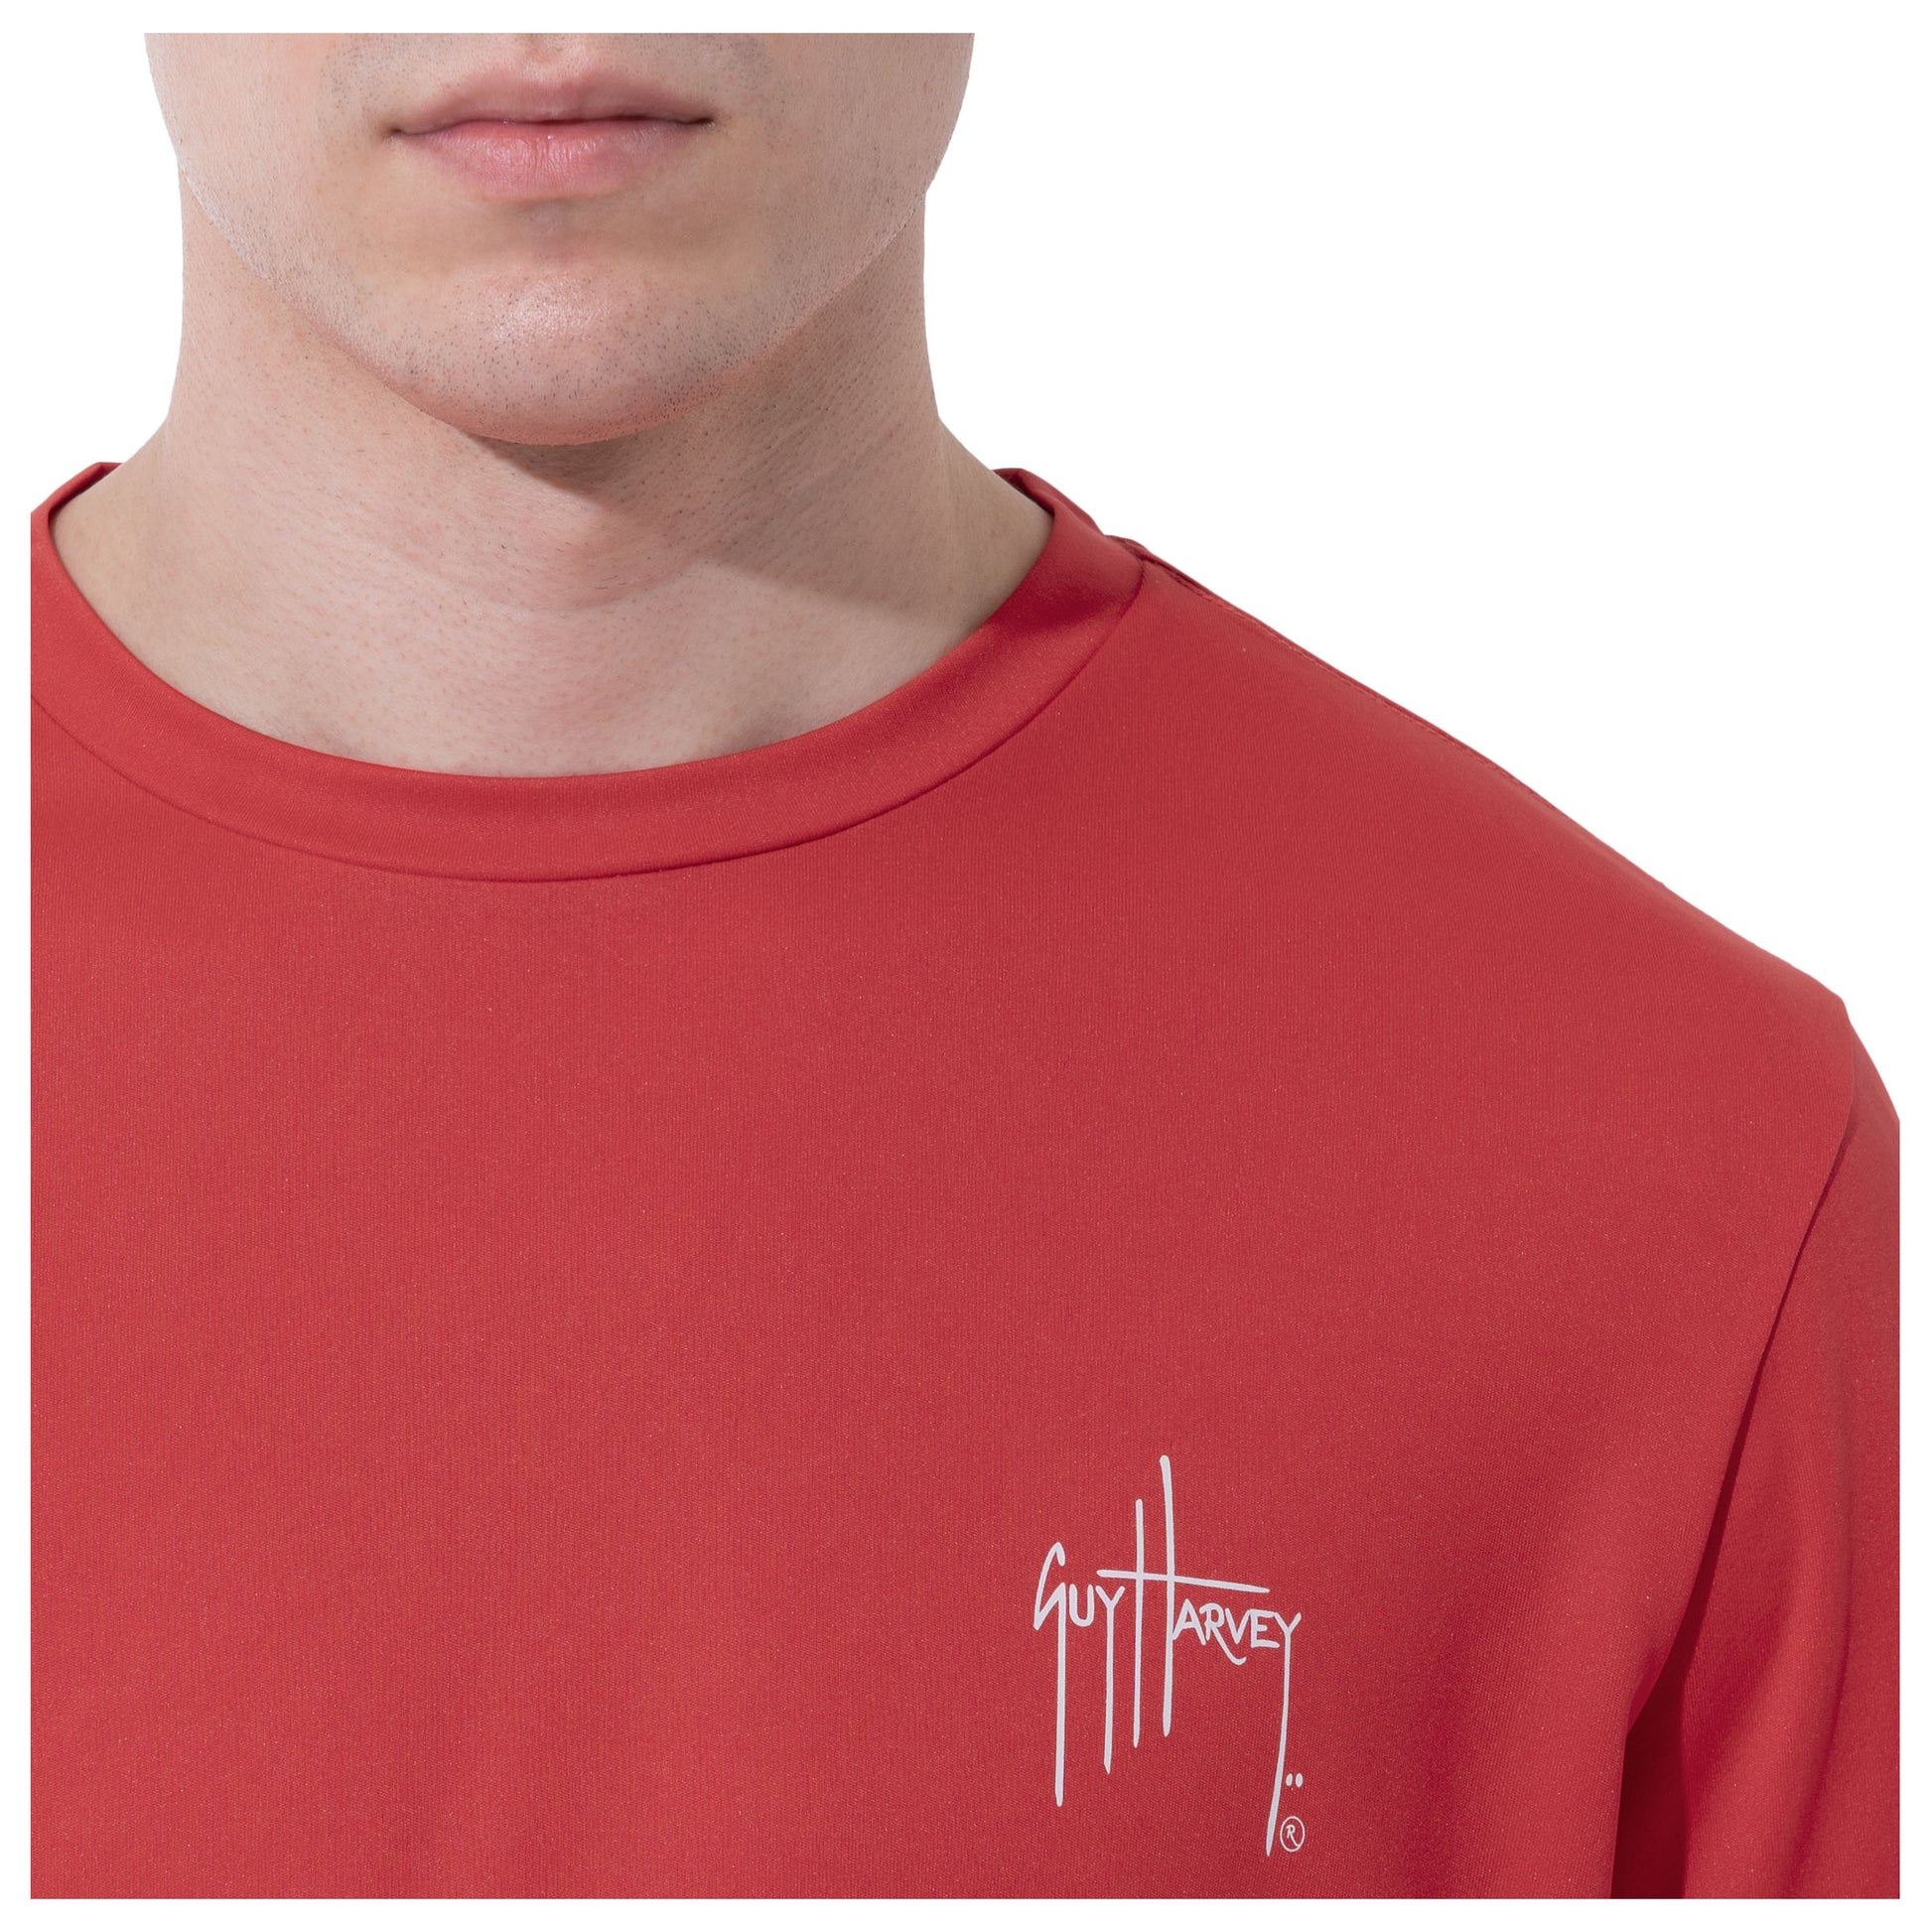 Men Long Sleeve Performance Fishing Sun Protection with UPF 50 Plus. Color Red Guy Harvey Signature on chest